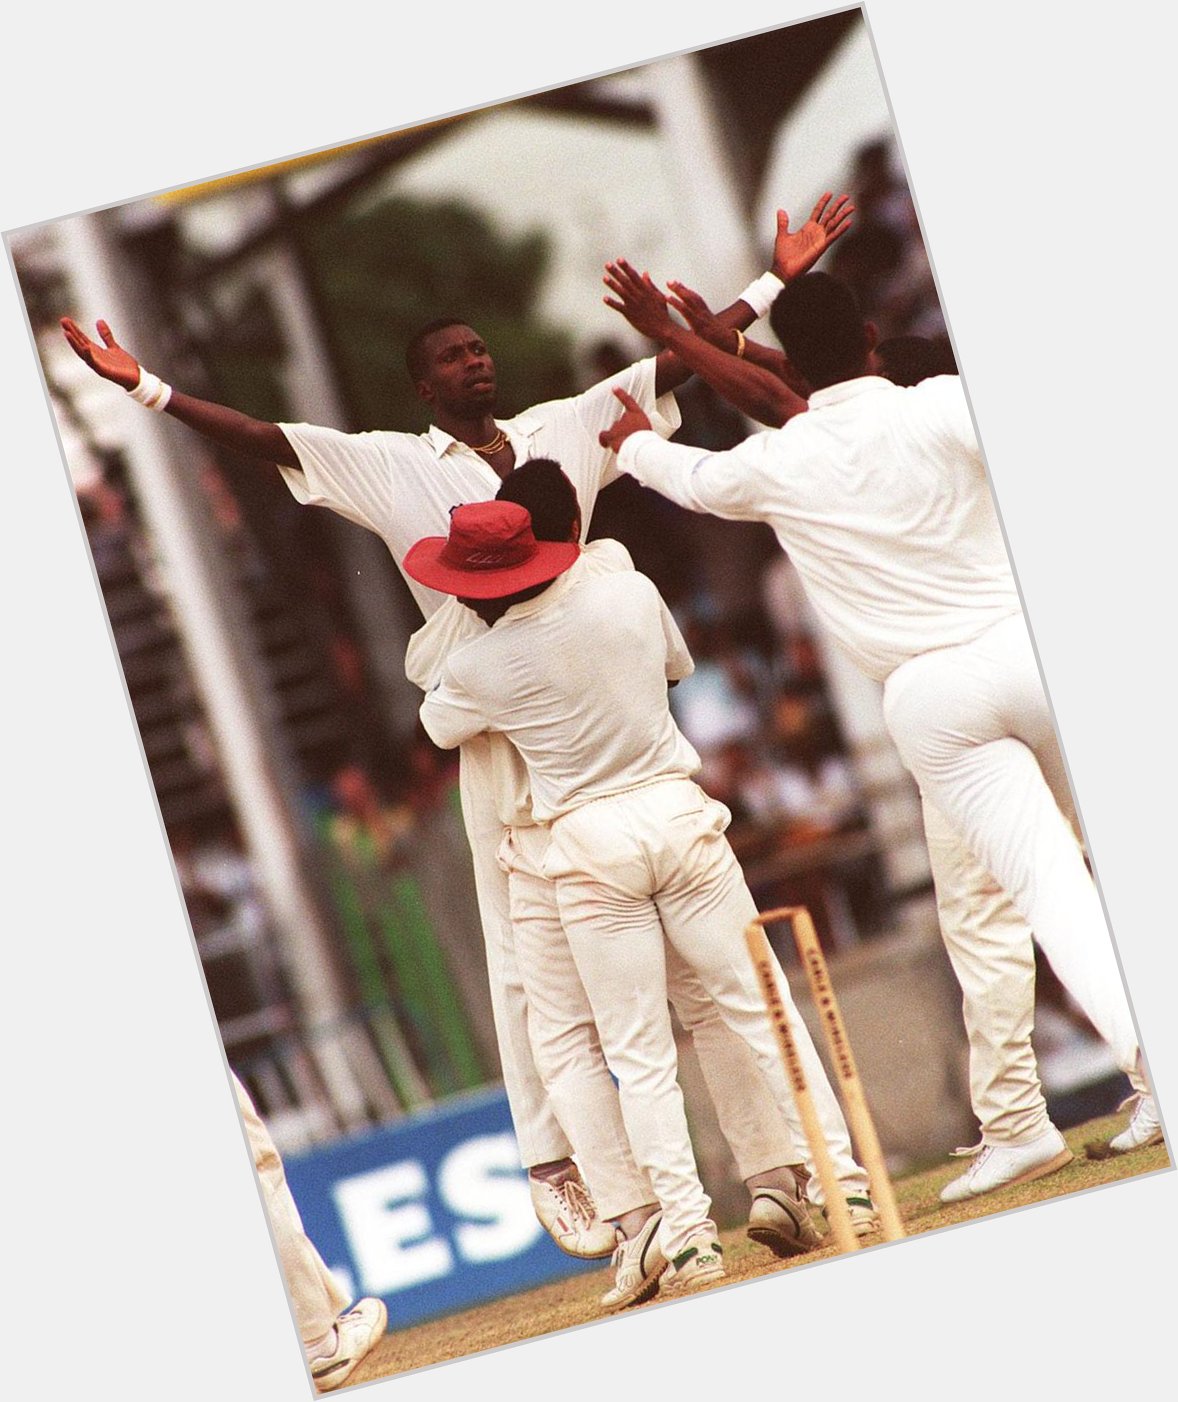 A very happy birthday to legend Sir Curtly Ambrose . He was the most lethal bowler of his generation. 